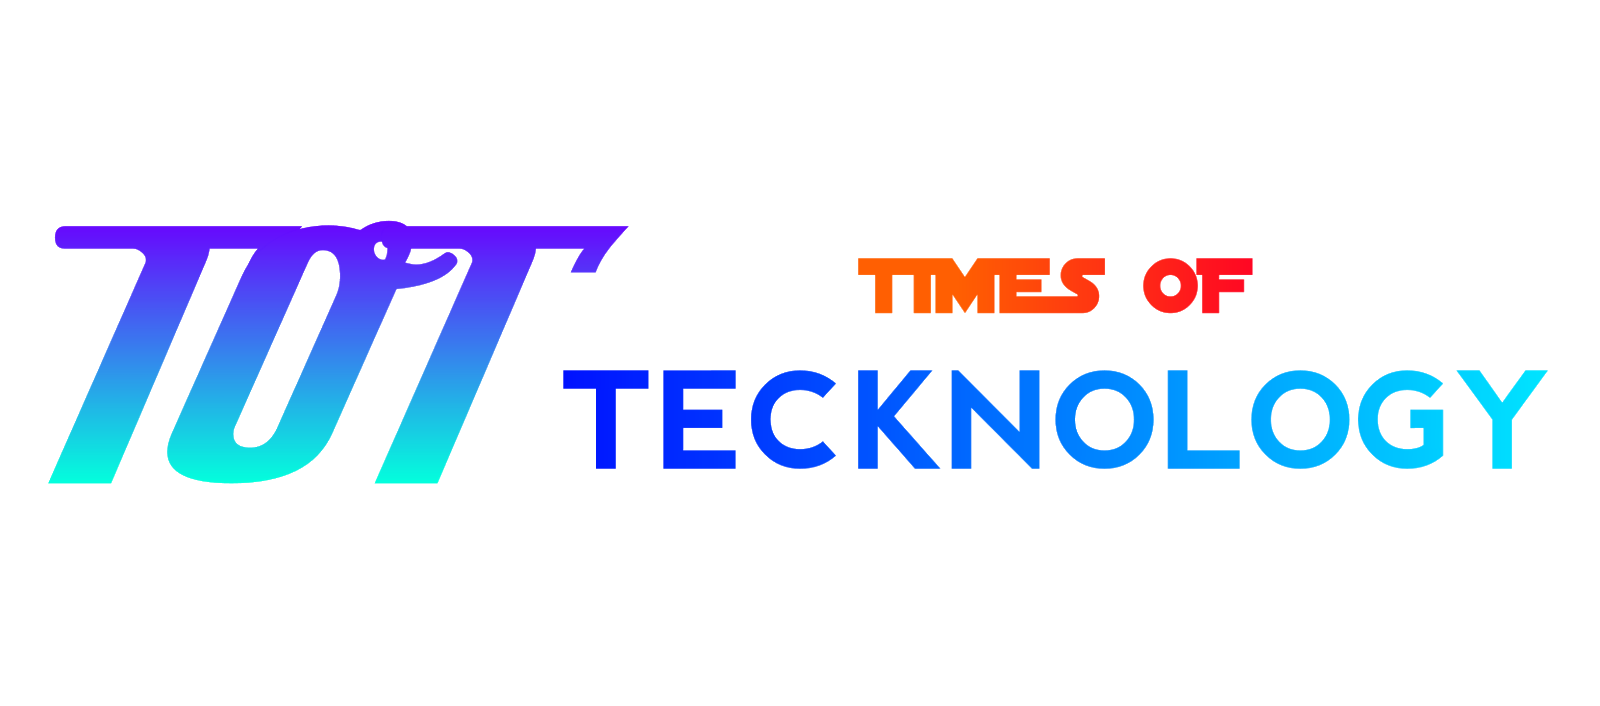 Times Of Tecknology - The Destination for tech related contents